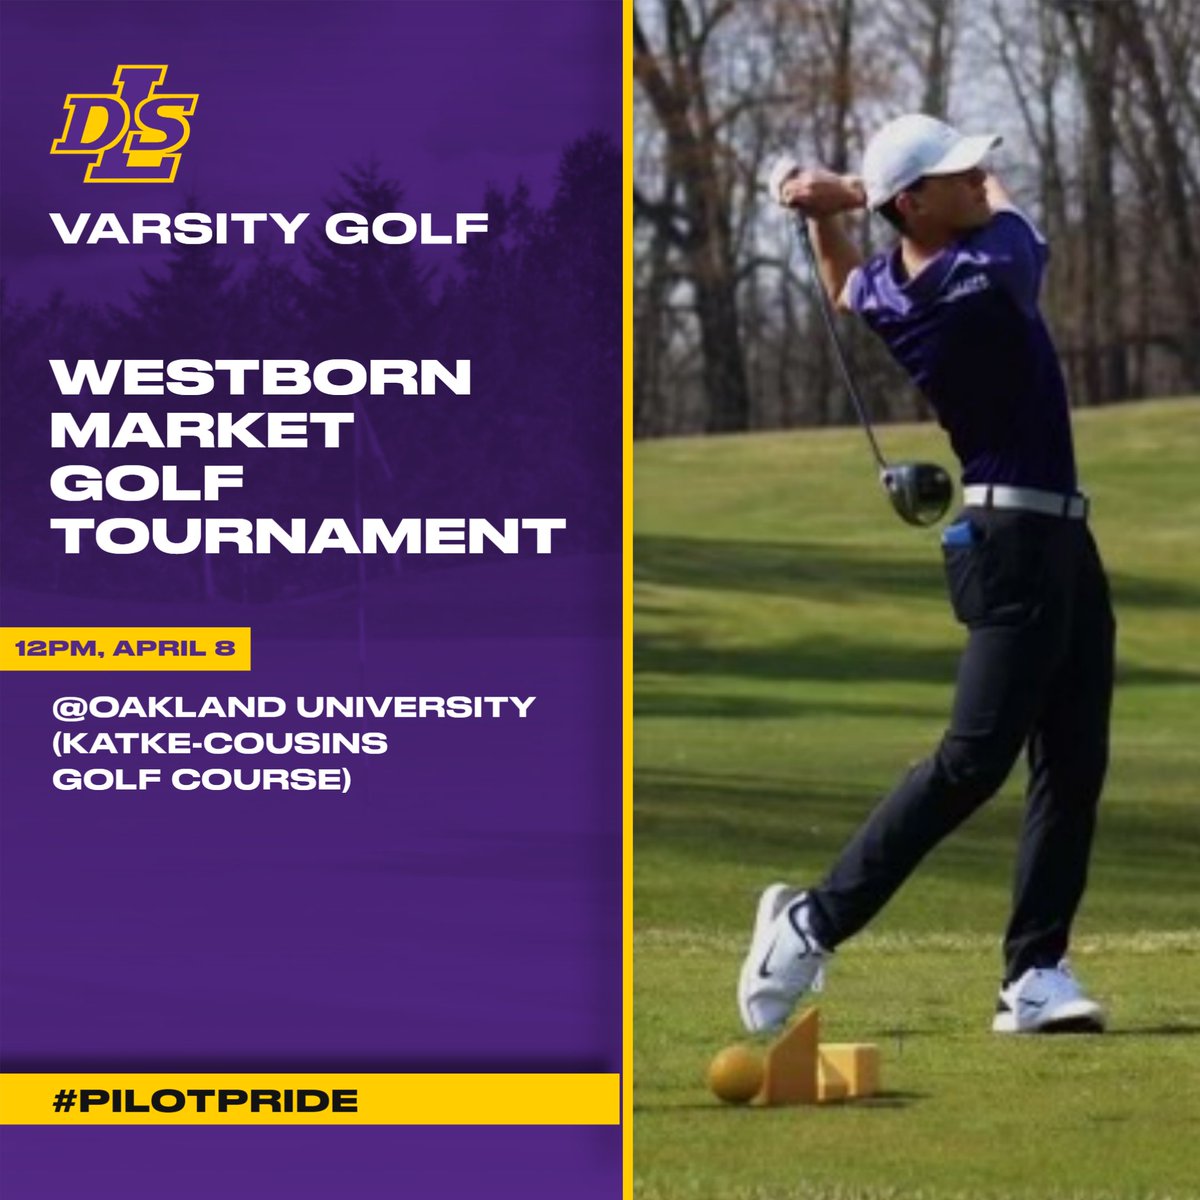 DLS Varsity Golf plays their first match of the season in the Westborn Market Golf Tournament at Oakland University (Katke-Cousins Golf Course) at 12PM, today. Each player will be provided with glasses for the solar eclipse. Let’s go, Pilots! #PilotPride @DLSPilotsGolf